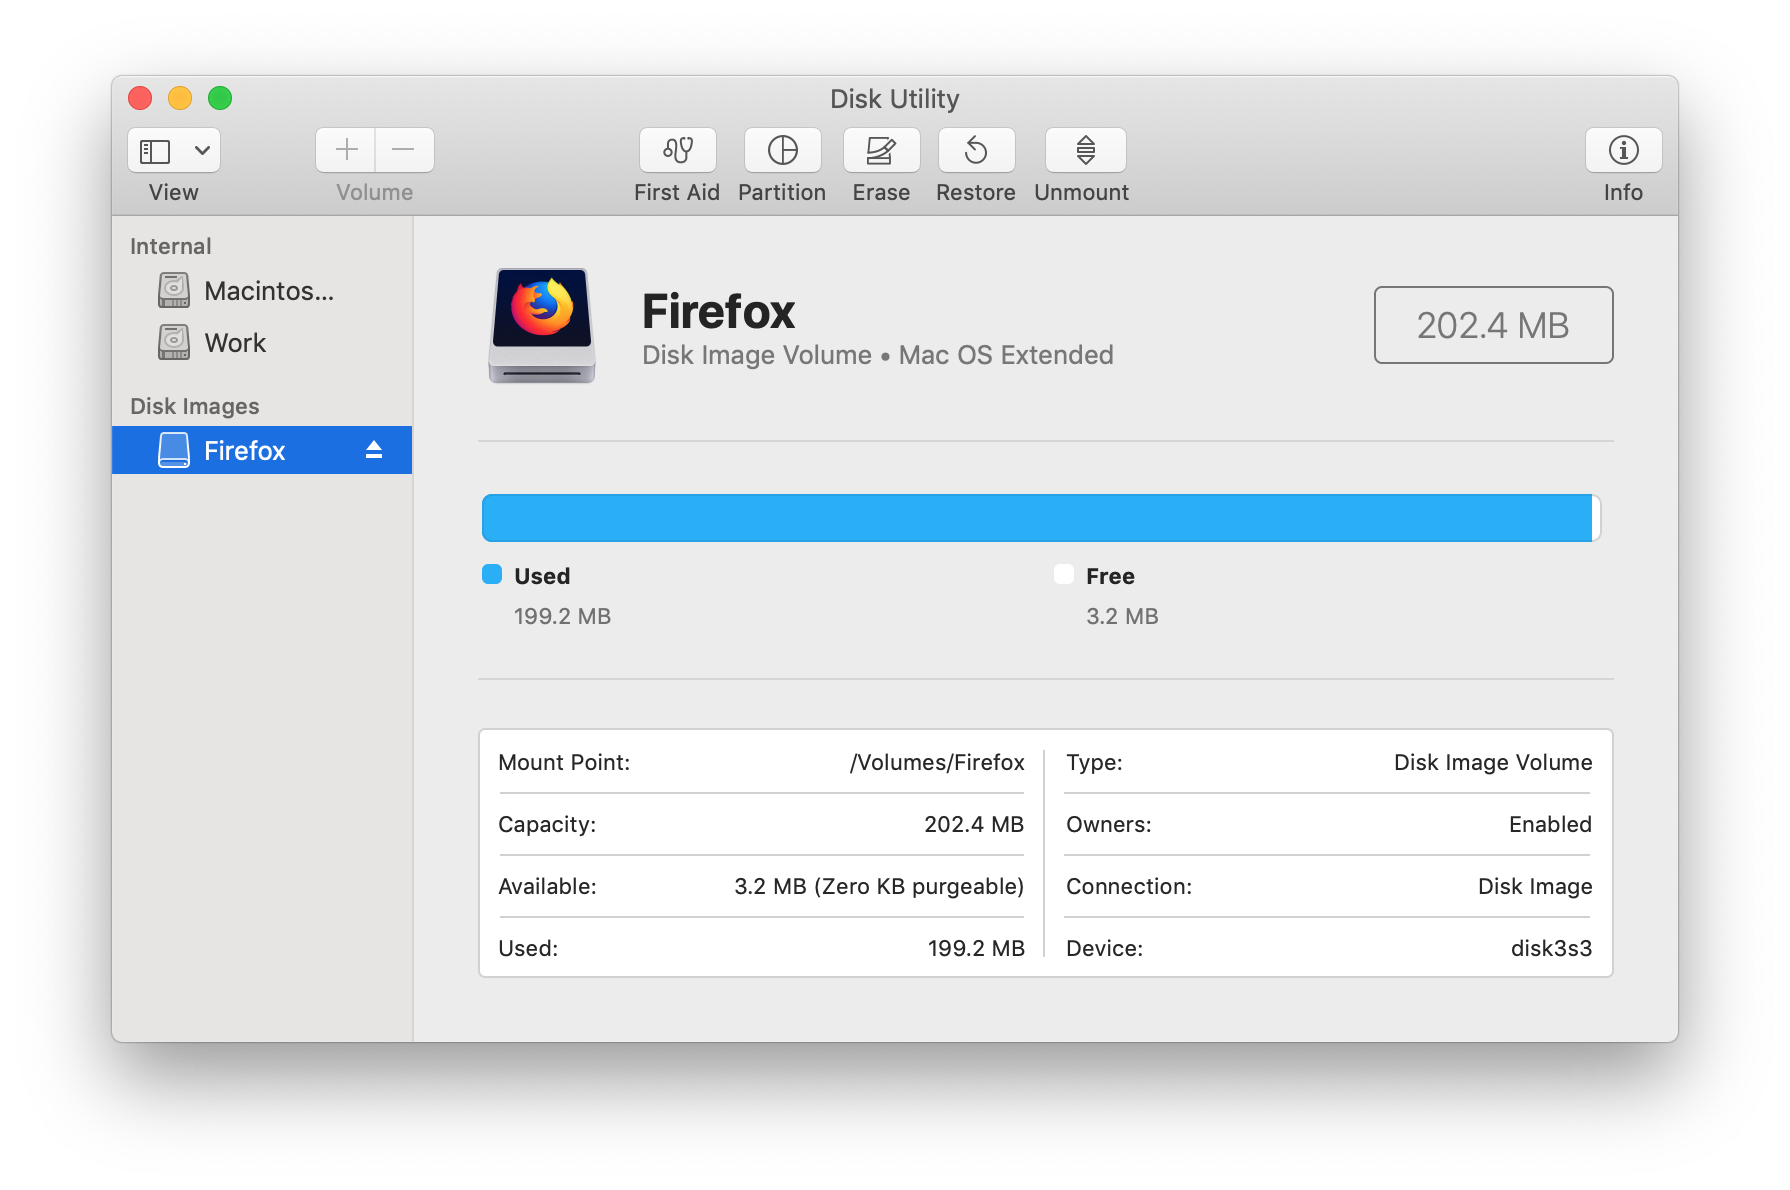 How To Use Disk Utitlity To Prepare .dmg File On Mac